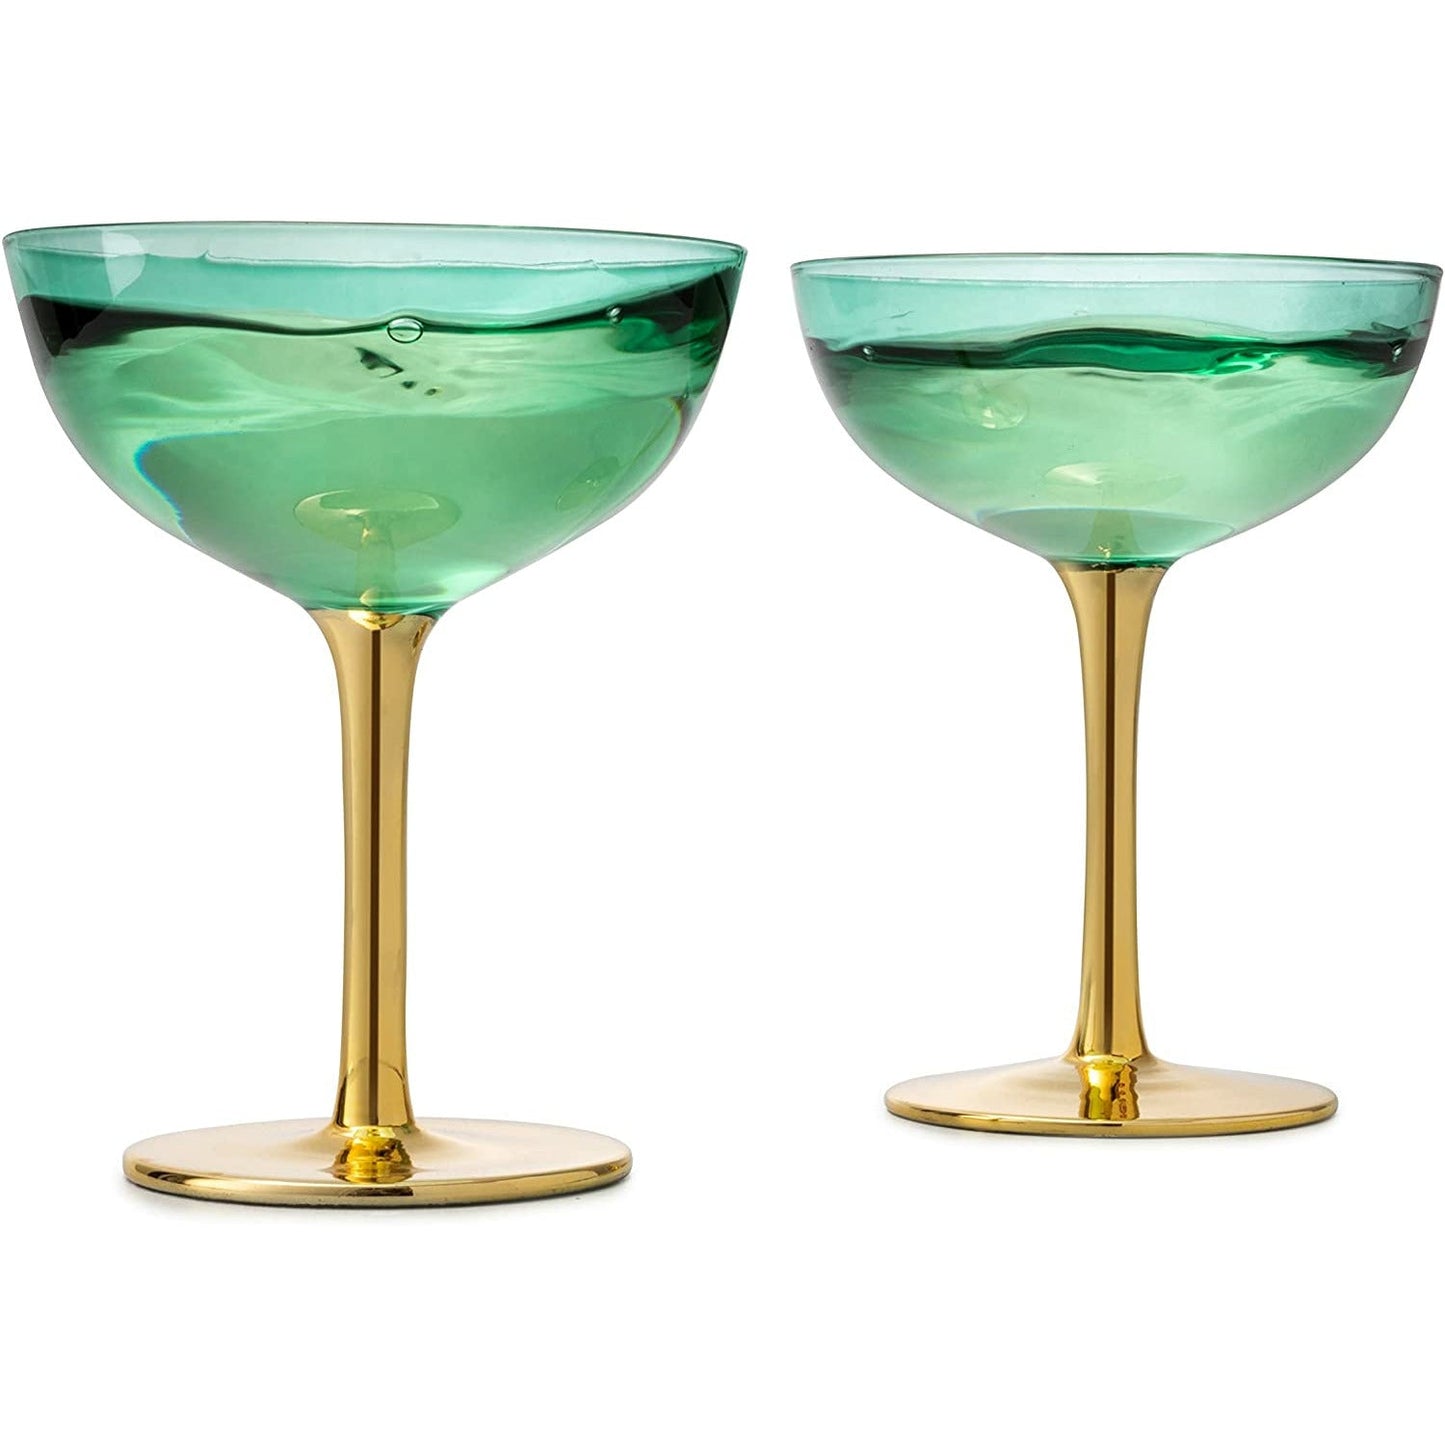 Colored Coupe Art Deco Glasses, Gold | Set of 4 | 12 oz Classic Cocktail Glassware for Champagne, Martini, Manhattan, Sidecar, Crystal Speakeasy Style Goblets Stems, Elegantly Vintage Blue by The Wine Savant